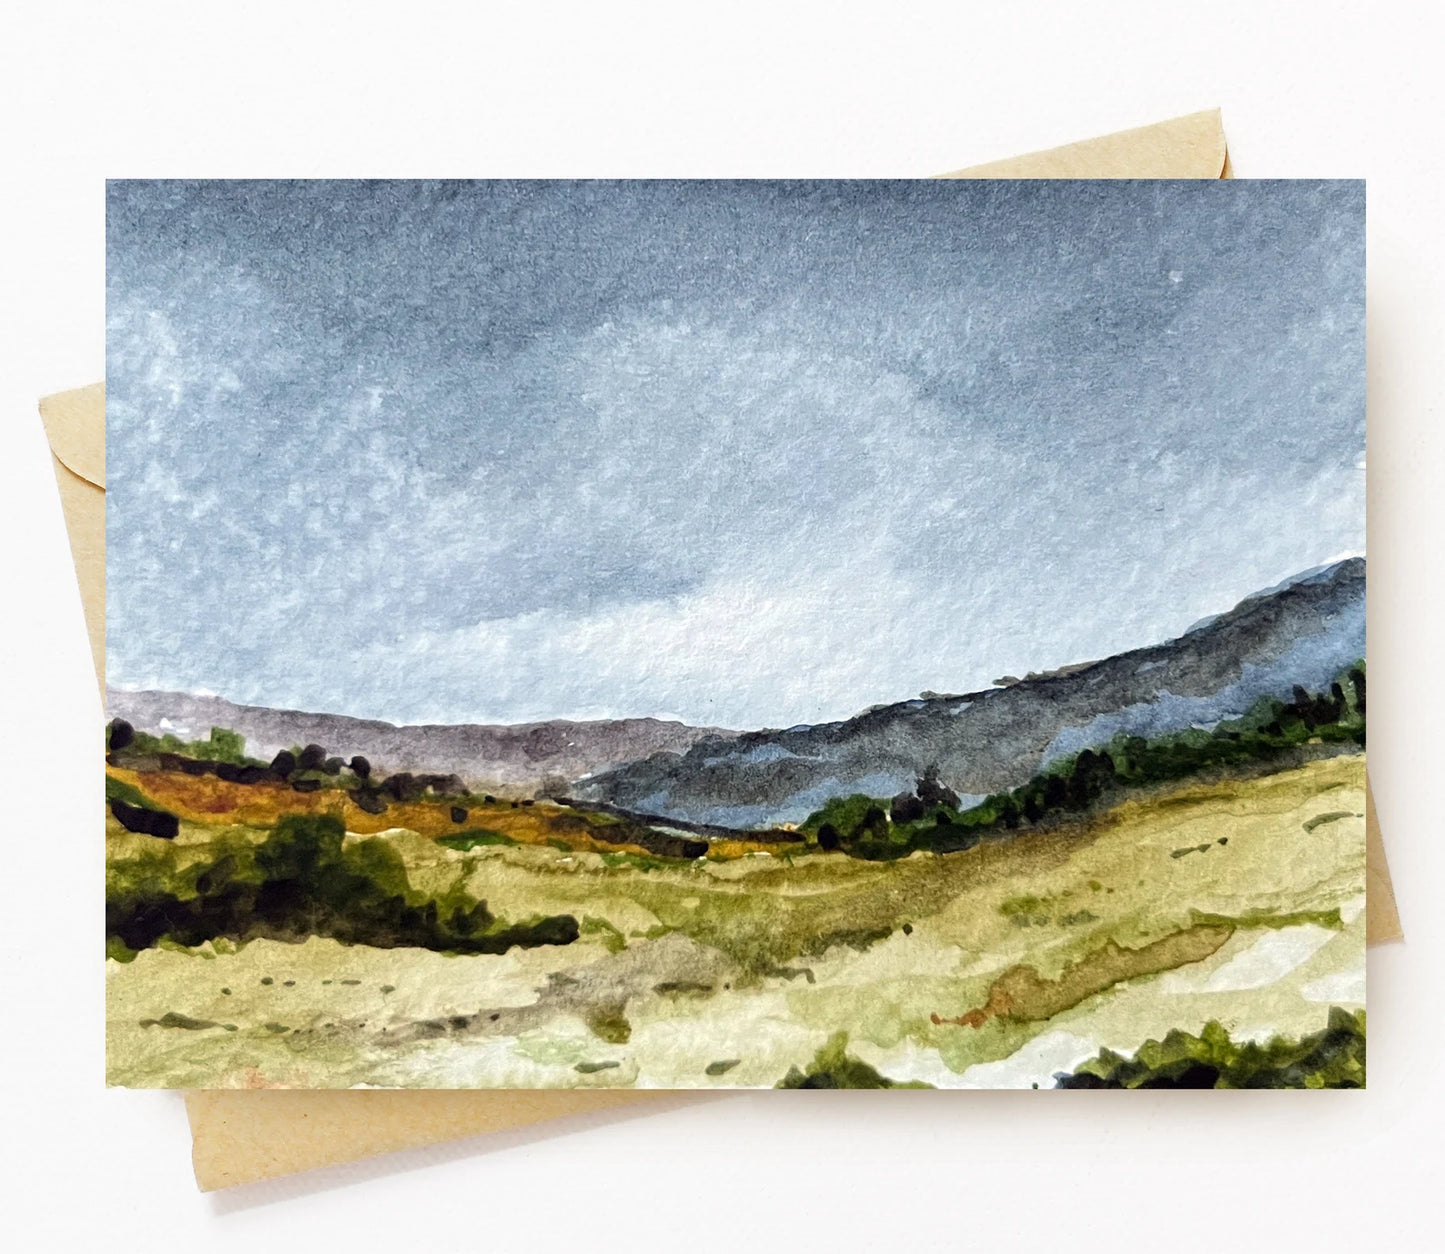 BellavanceInk: Greeting Card With Watercolor Of The Fields And Mountains Of Crozet Virginia 5 x 7 Inches - BellavanceInk